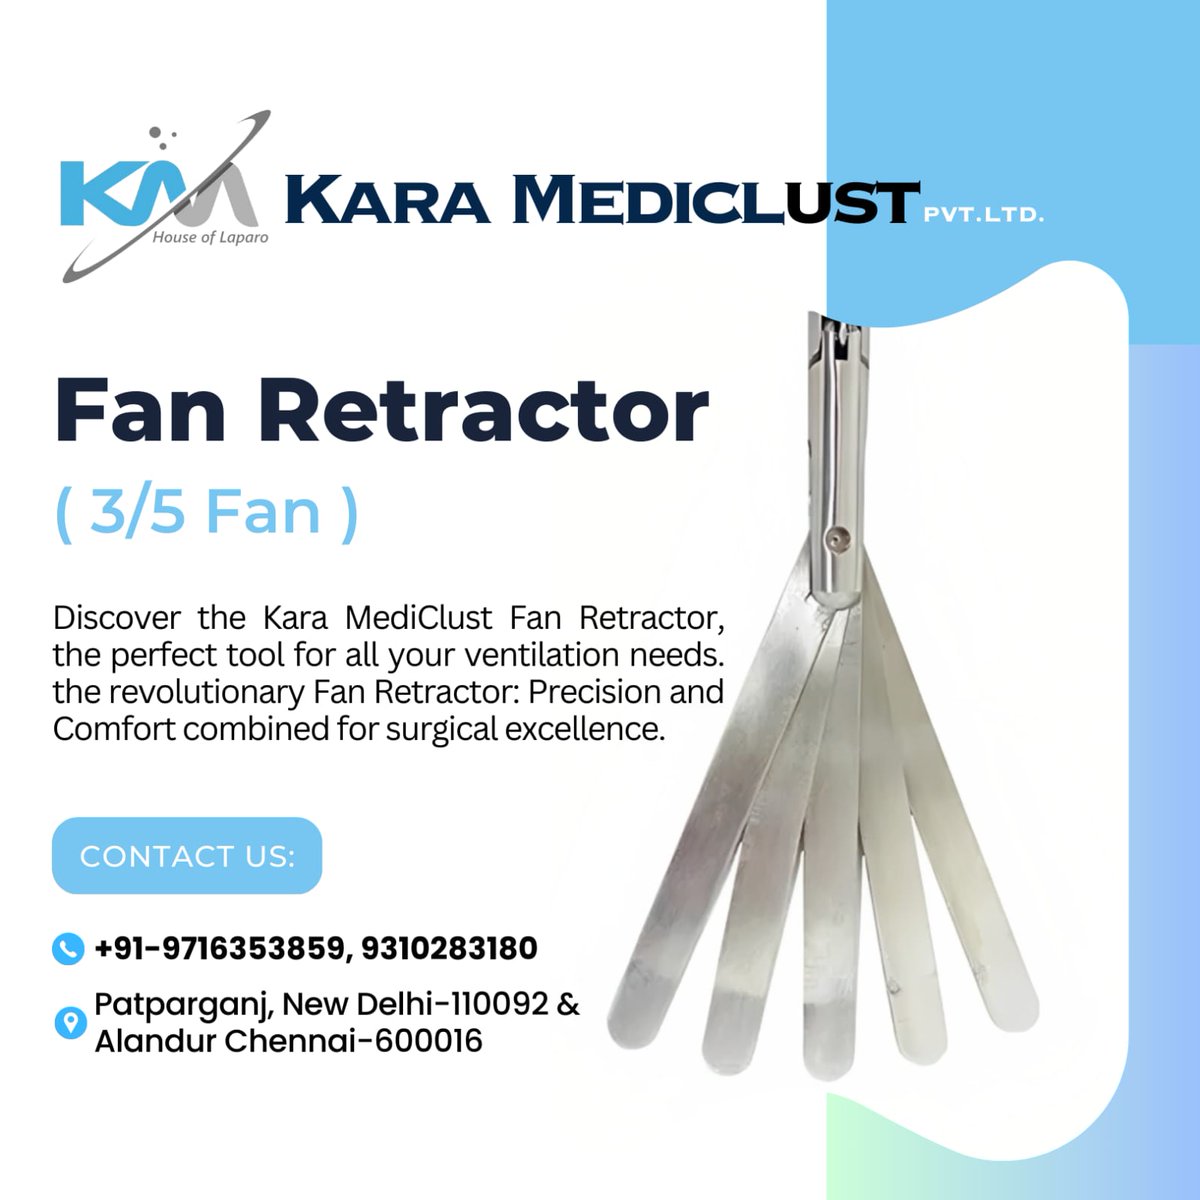 Experience precision and durability with Fan Retractor instruments from Kara Mediclust. Trust in their expertise and enhance your surgical procedures today. Shop now! 

#surgicaltools #healthcareproducts
#karamediclust 
#medicalinstruments
#storm #doctors #hospitals